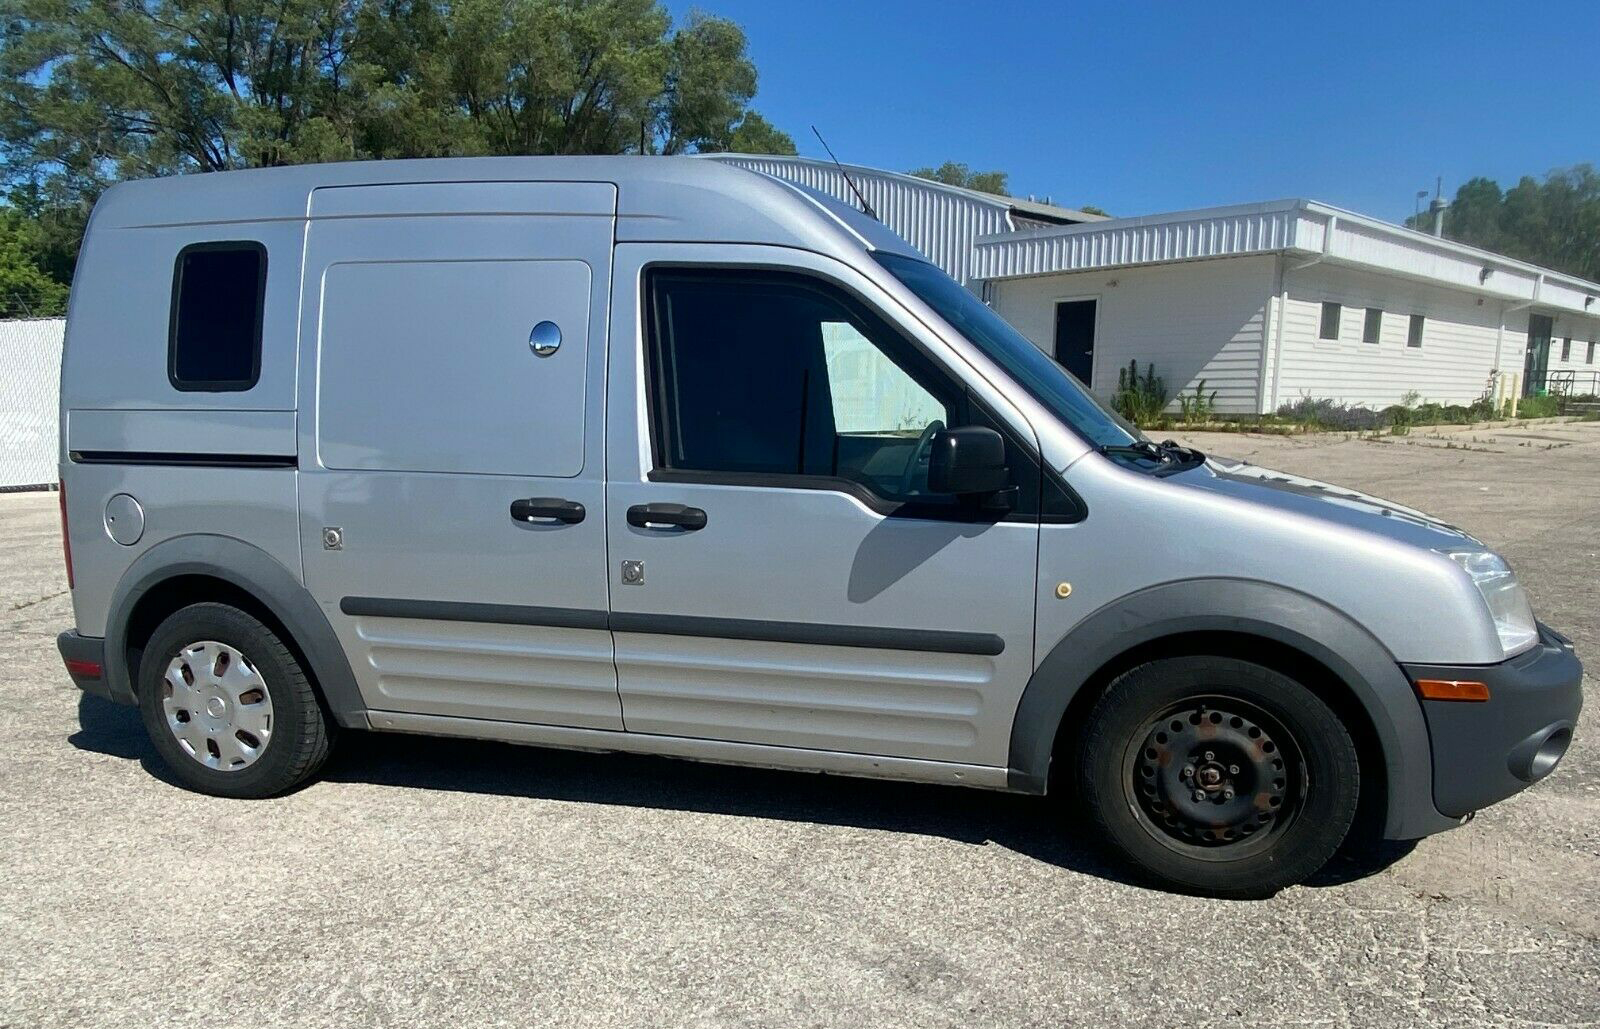 2012 Ford Transit Connect is Stealth Armored Vehicle - eBay Motors Blog